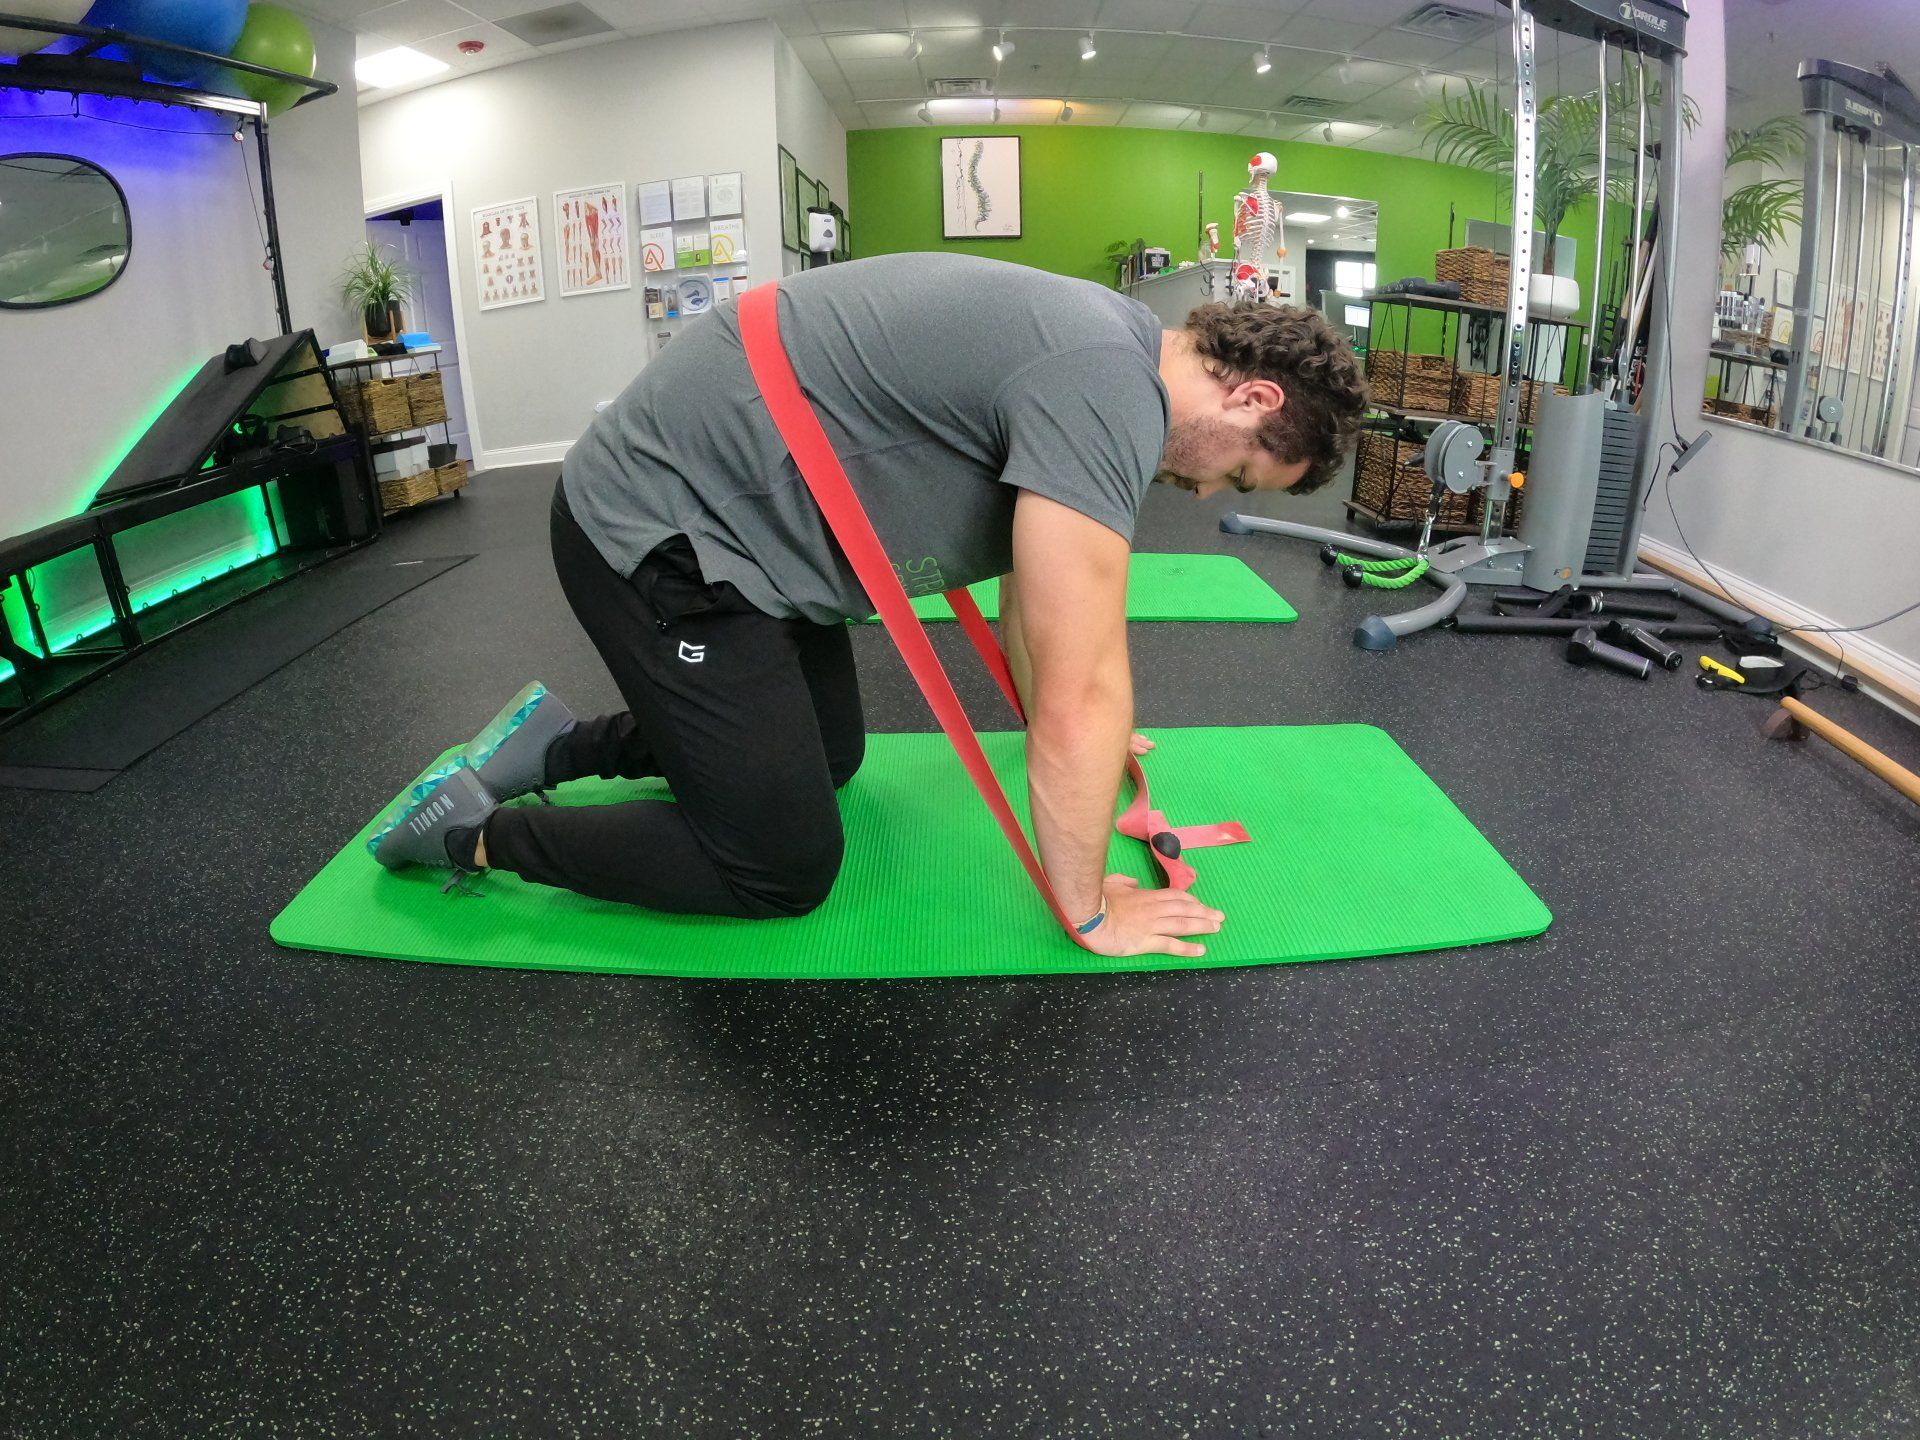 Spinal Roll Down - Improve Spinal Range of Motion 